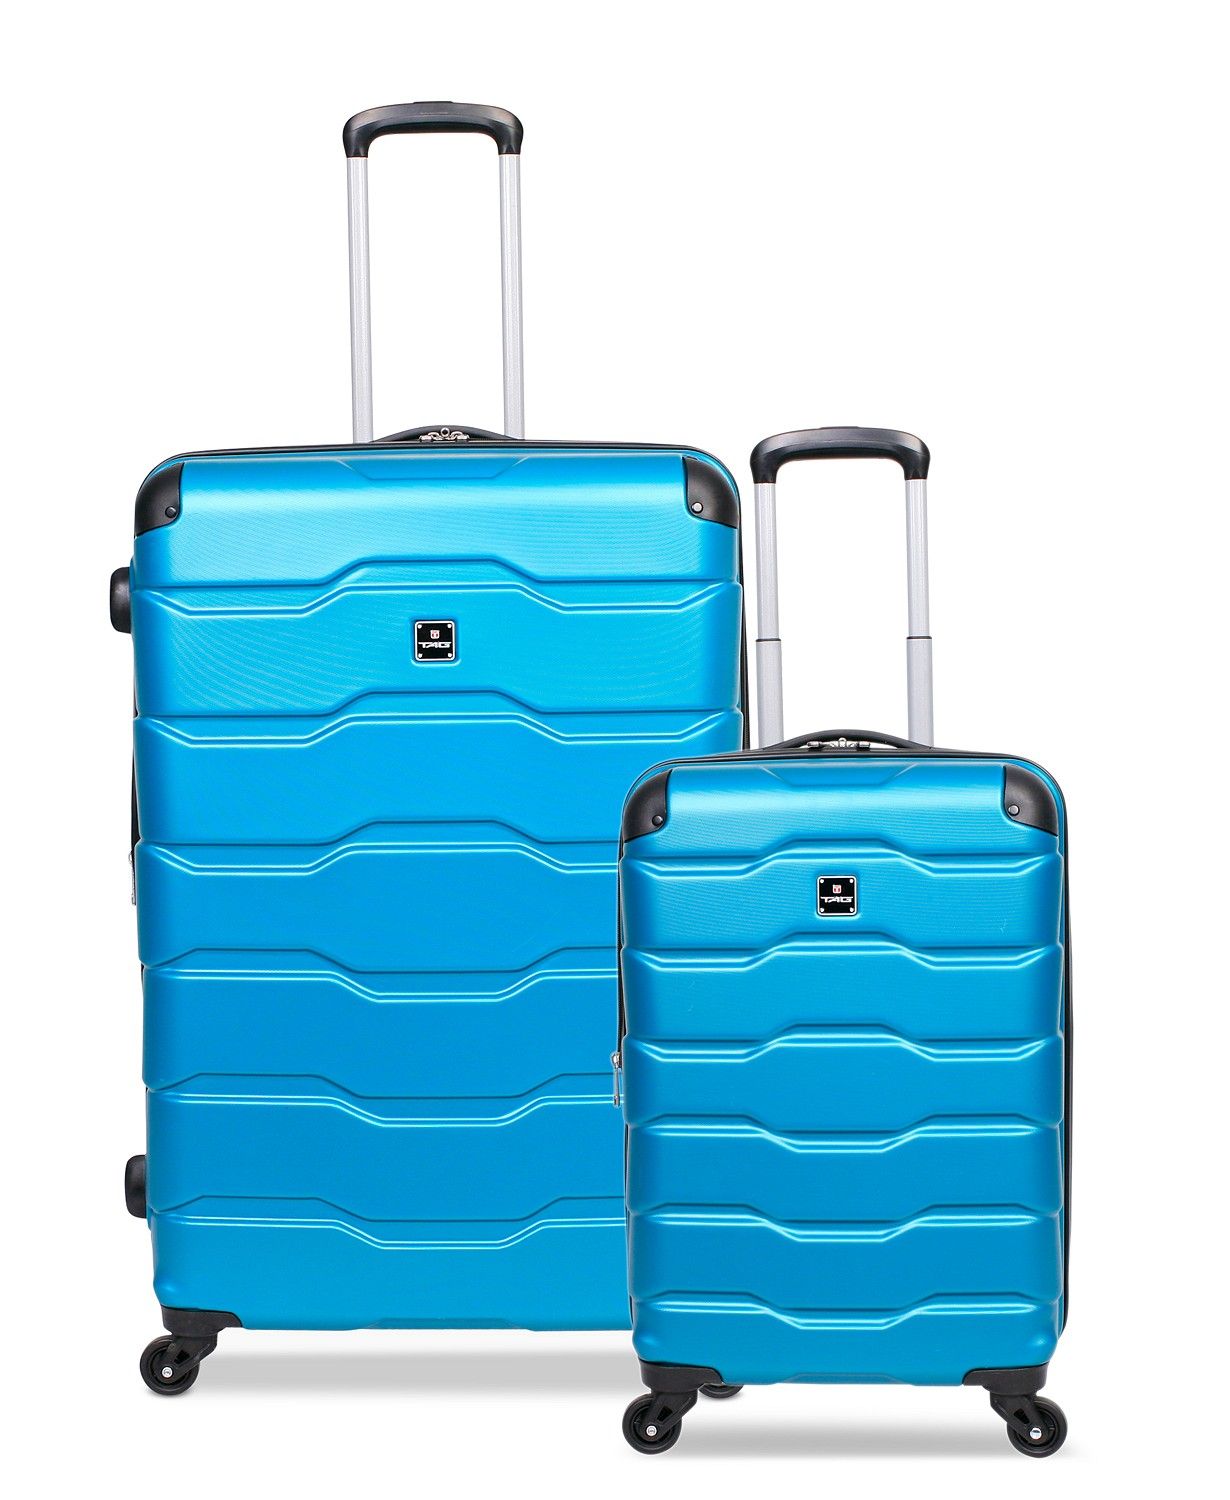 Matrix 2.0 Hardside Expandable Luggage Collection, Created for Macy's | Macys (US)